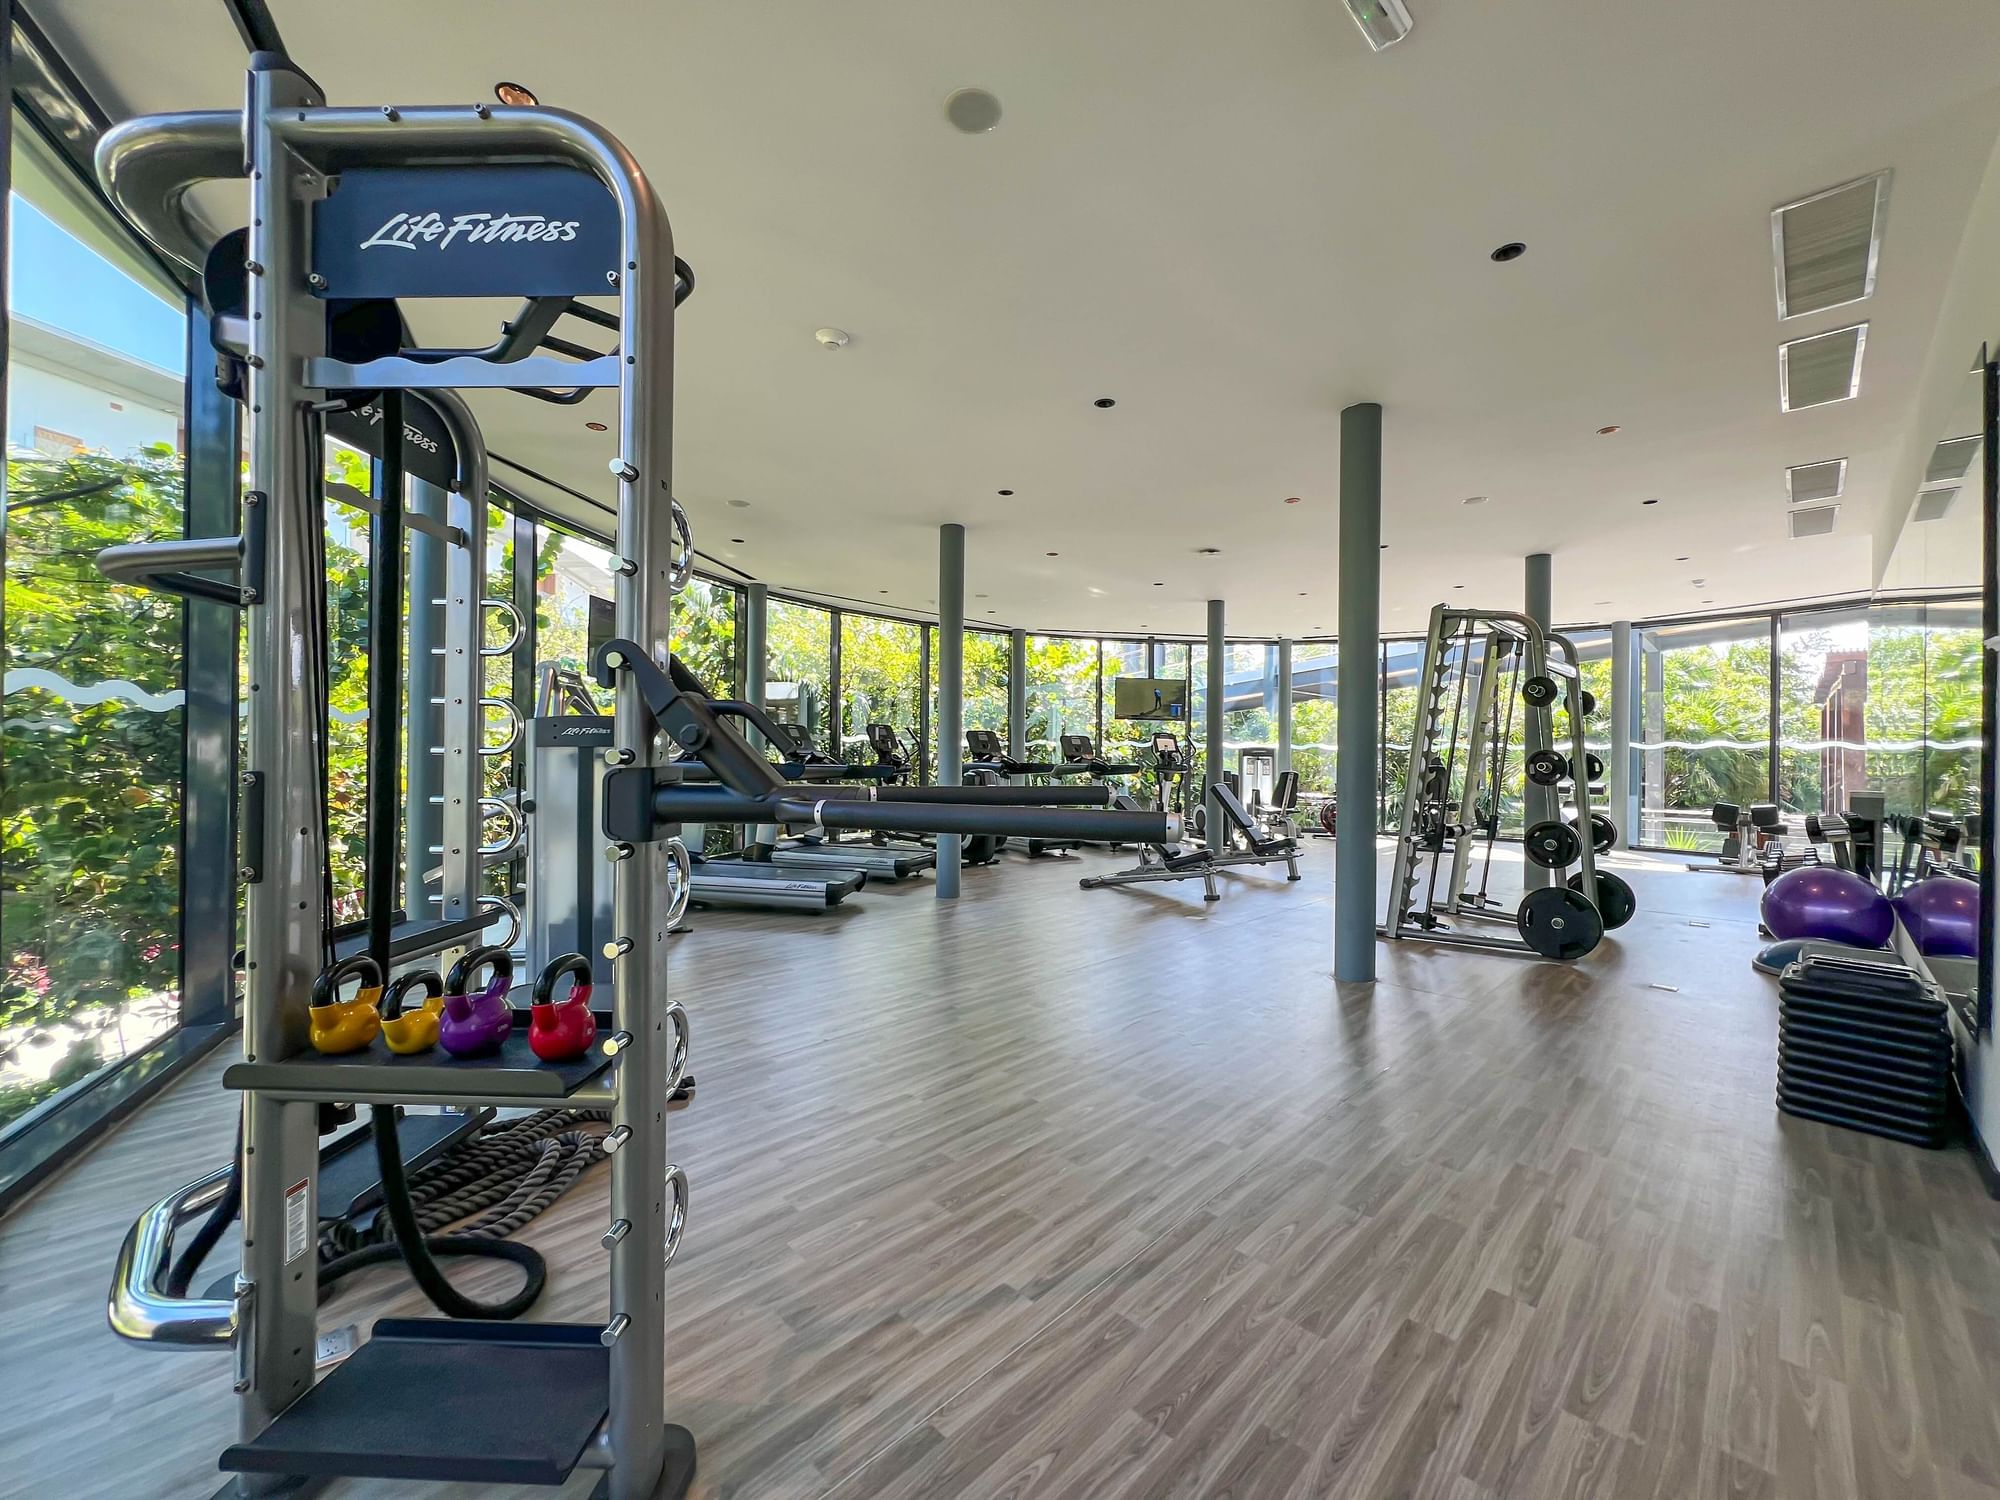 Dumbells, training equipment & machines in the gymnasium at Haven Riviera Cancun